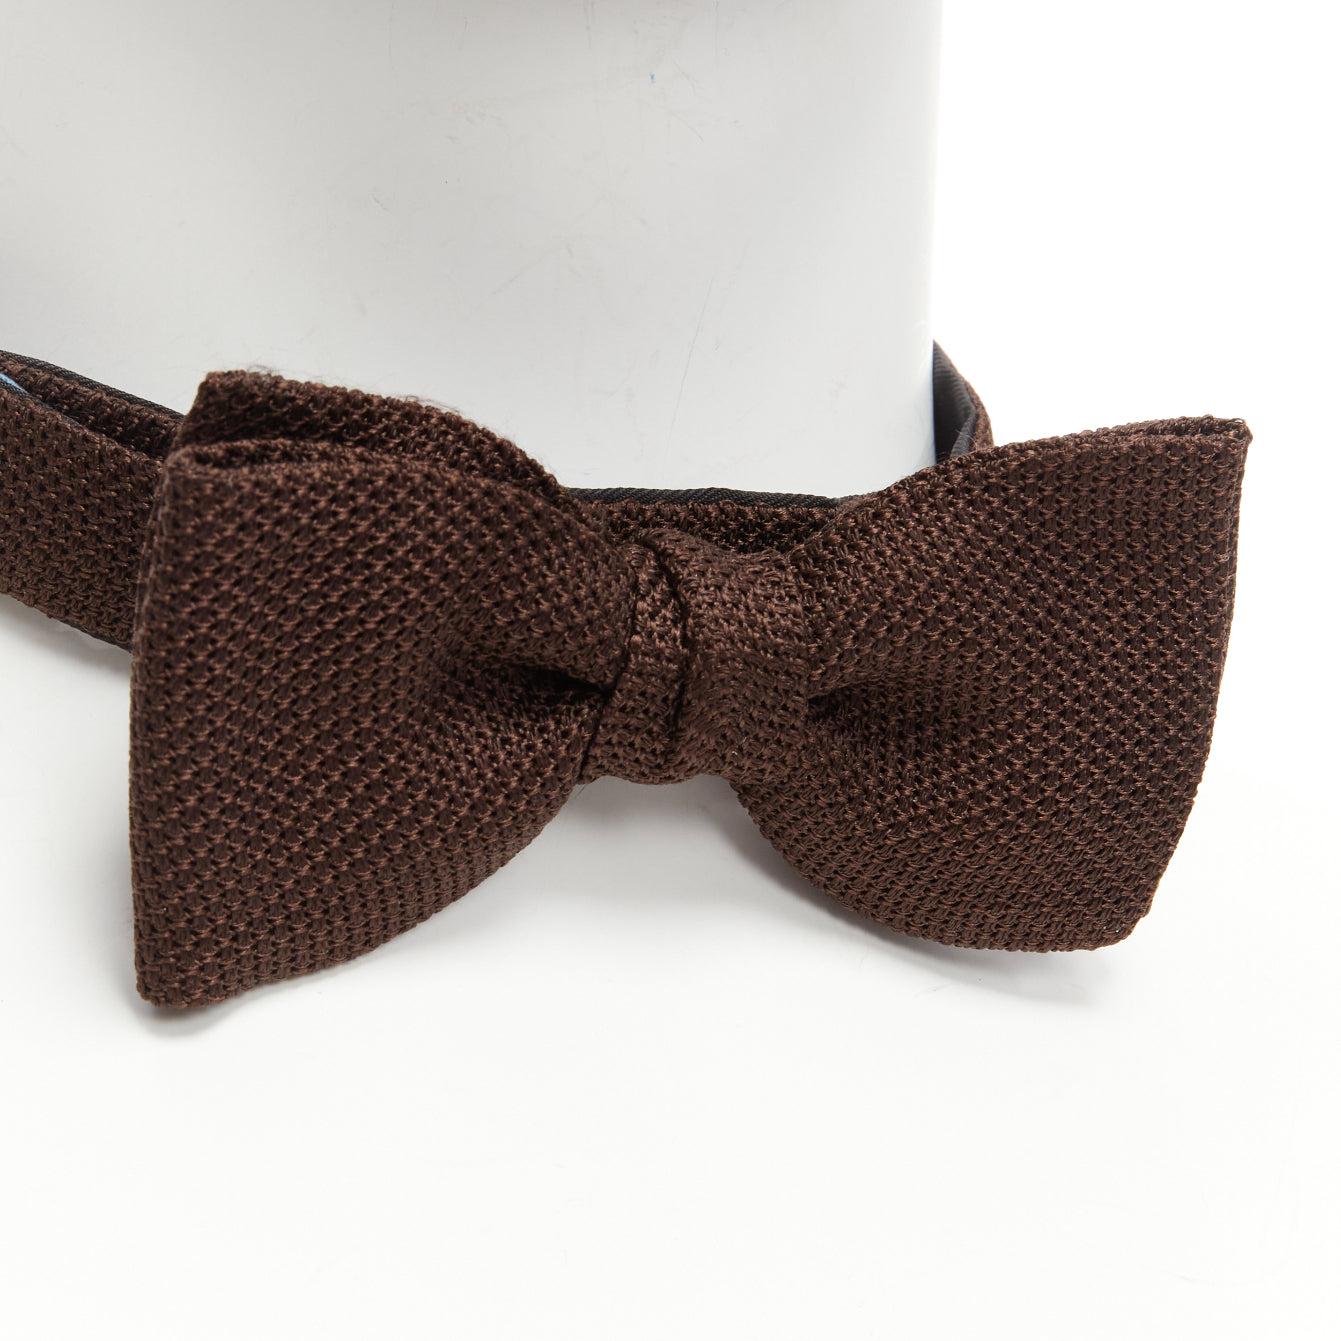 new LANVIN Alber Elbaz brown textured fabric bow tie Adjustable
Reference: CNLE/A00227
Brand: Lanvin
Designer: Alber Elbaz
Material: Fabric
Color: Brown
Pattern: Solid
Closure: Hook & Bar
Lining: Brown Fabric
Extra Details: Adjustable